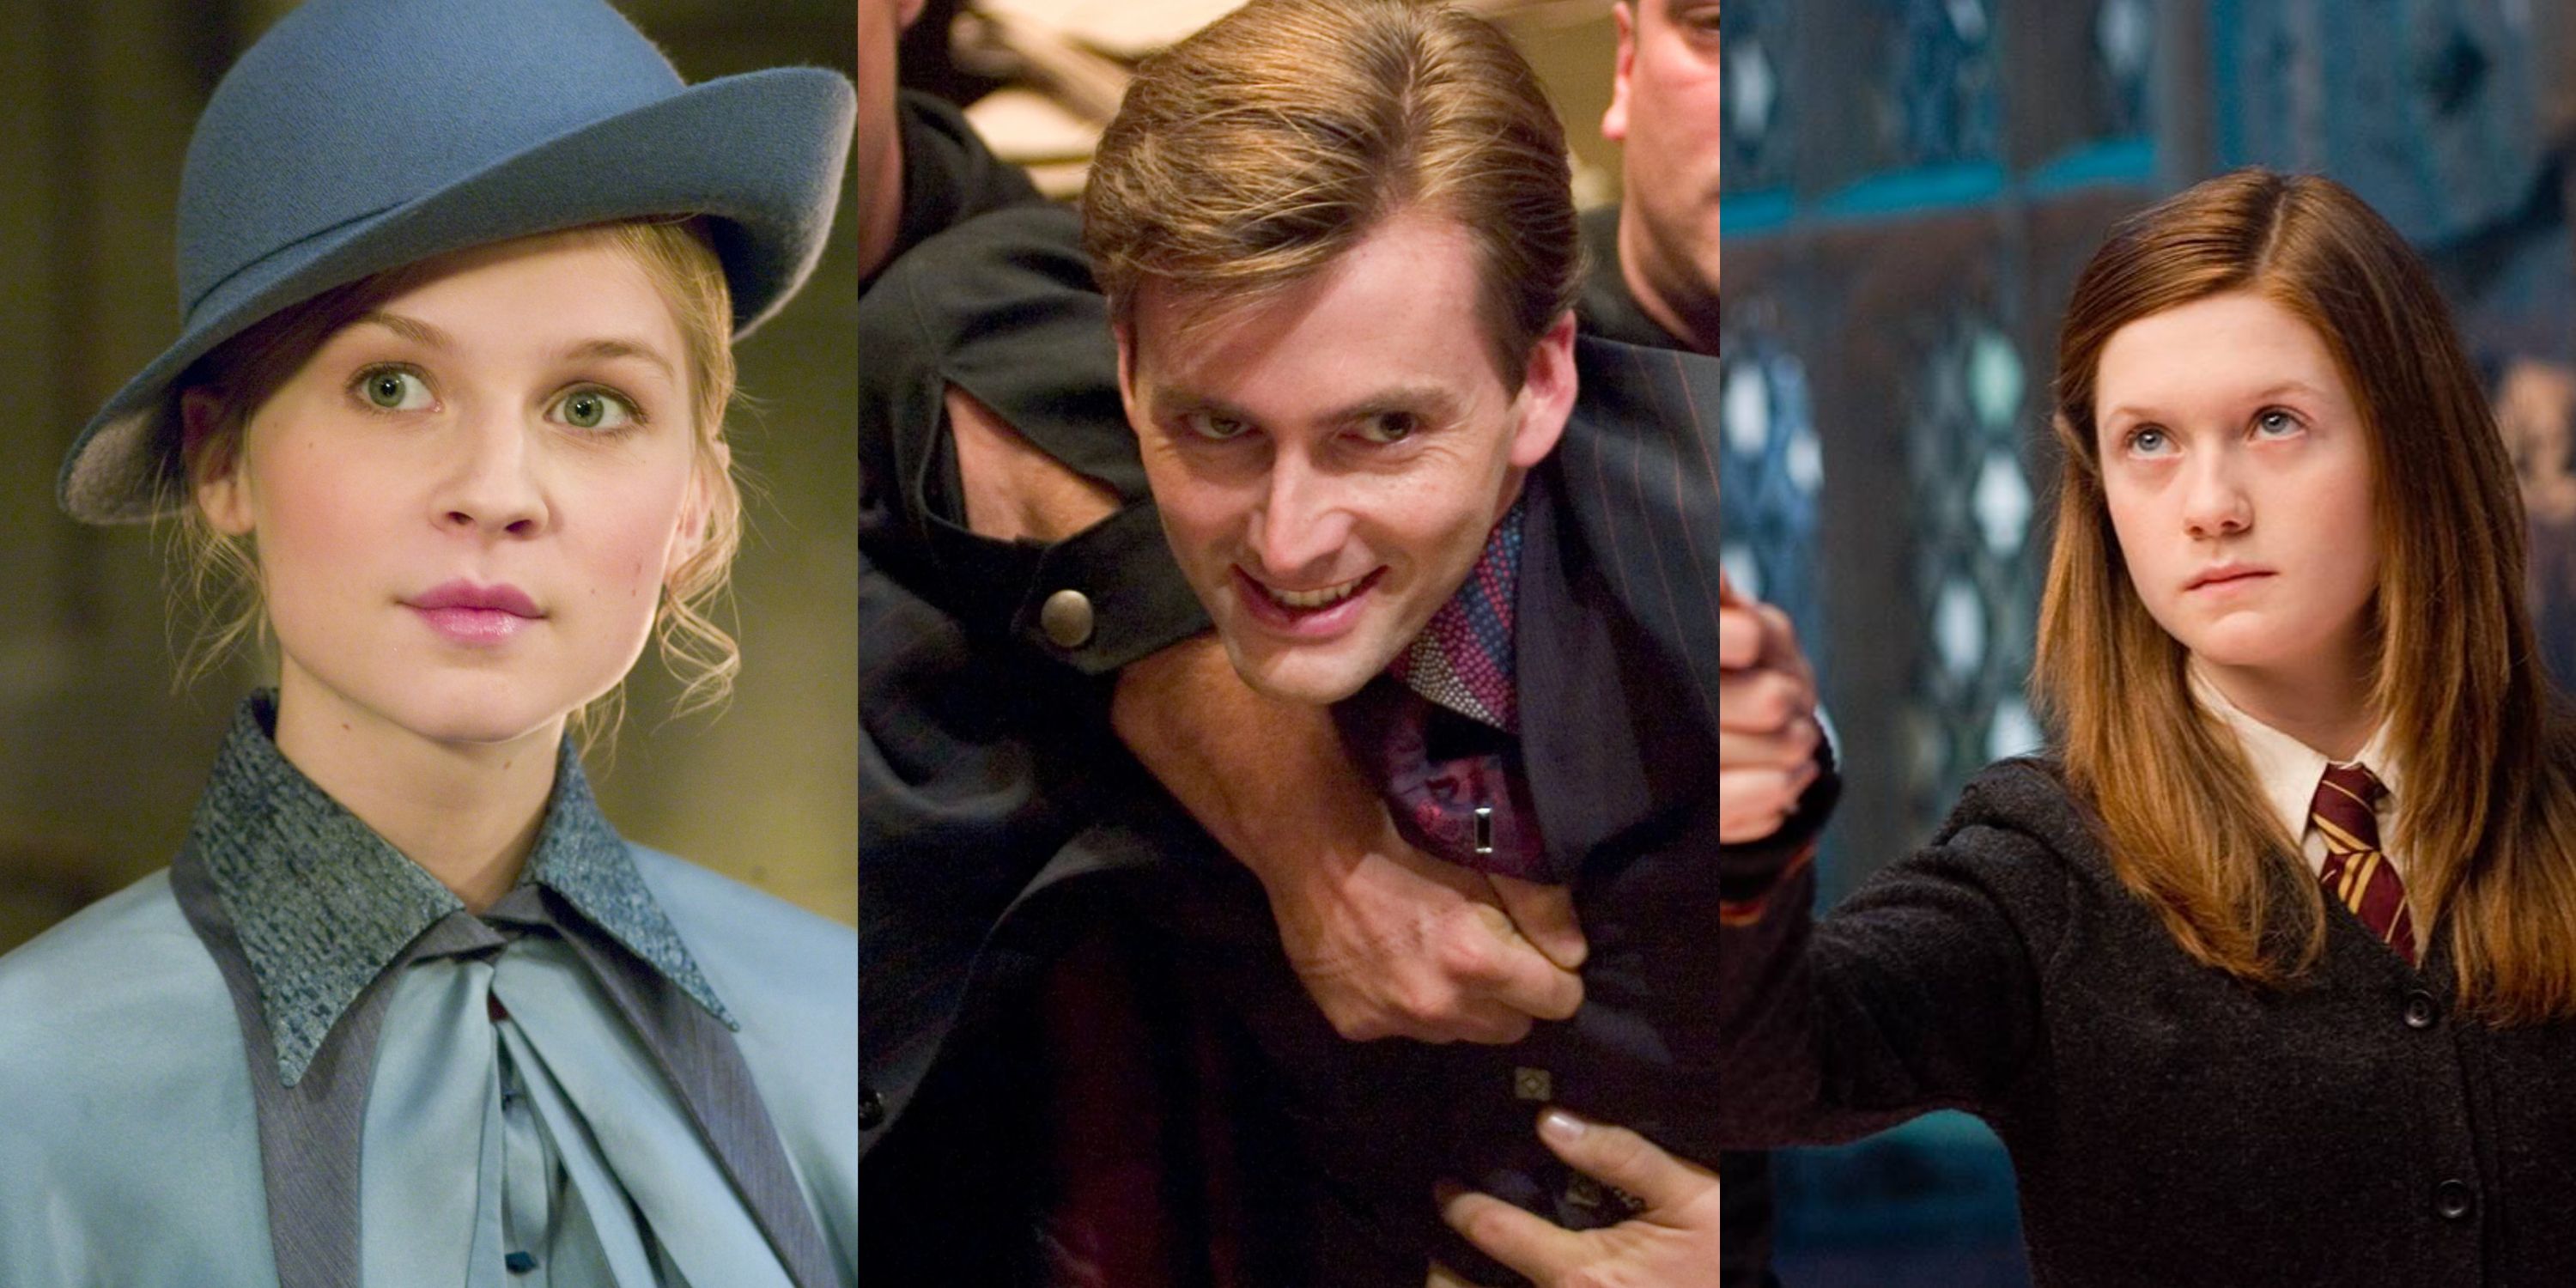 Split image of Fleur Delacour in uniform, Barty Crouch Jr smiling while being escorted away, and Ginny Weasley looking up with wand in hand